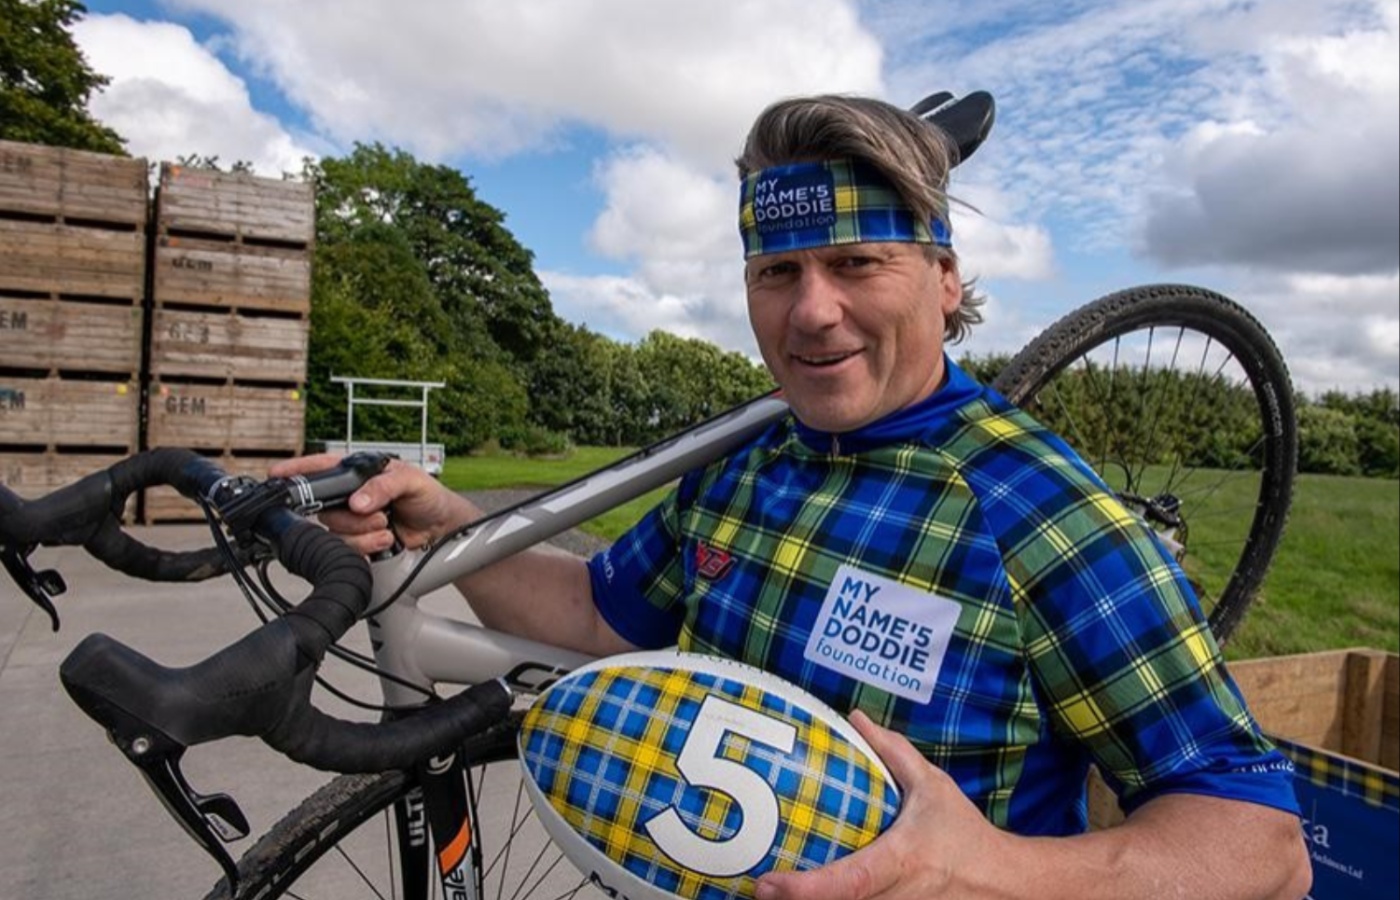  North-east man Duncan Barton is taking part in a 700-mile cycling challenge led by former rugby international Kenny Logan.